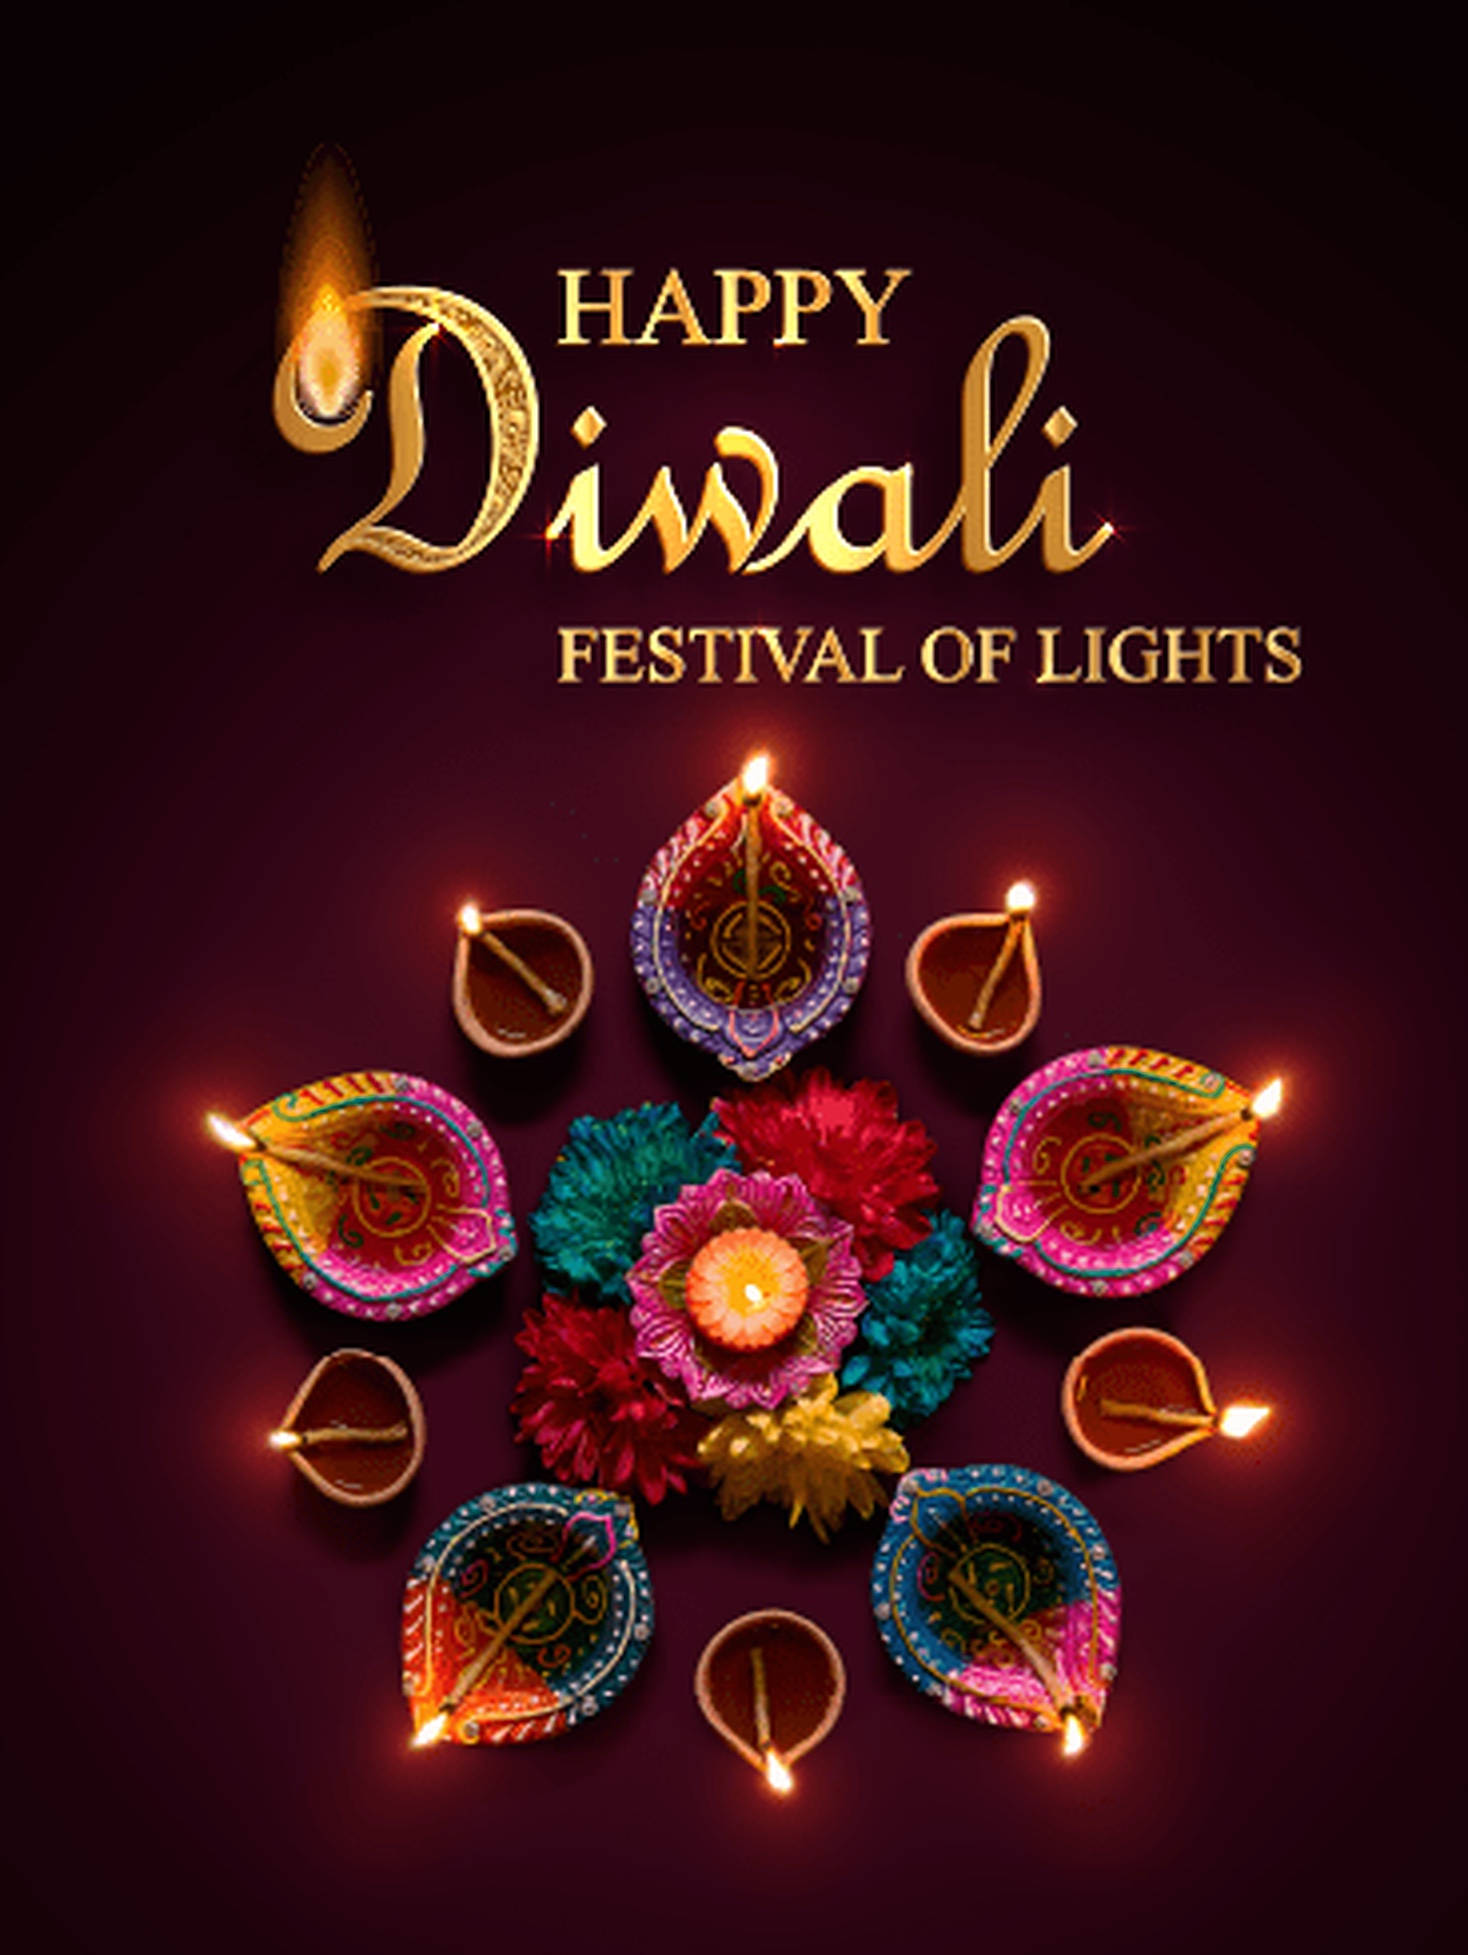 An Amazing Diwali Digital Greeting Card Features A Candle With Flowers Below On A Maroon Background.